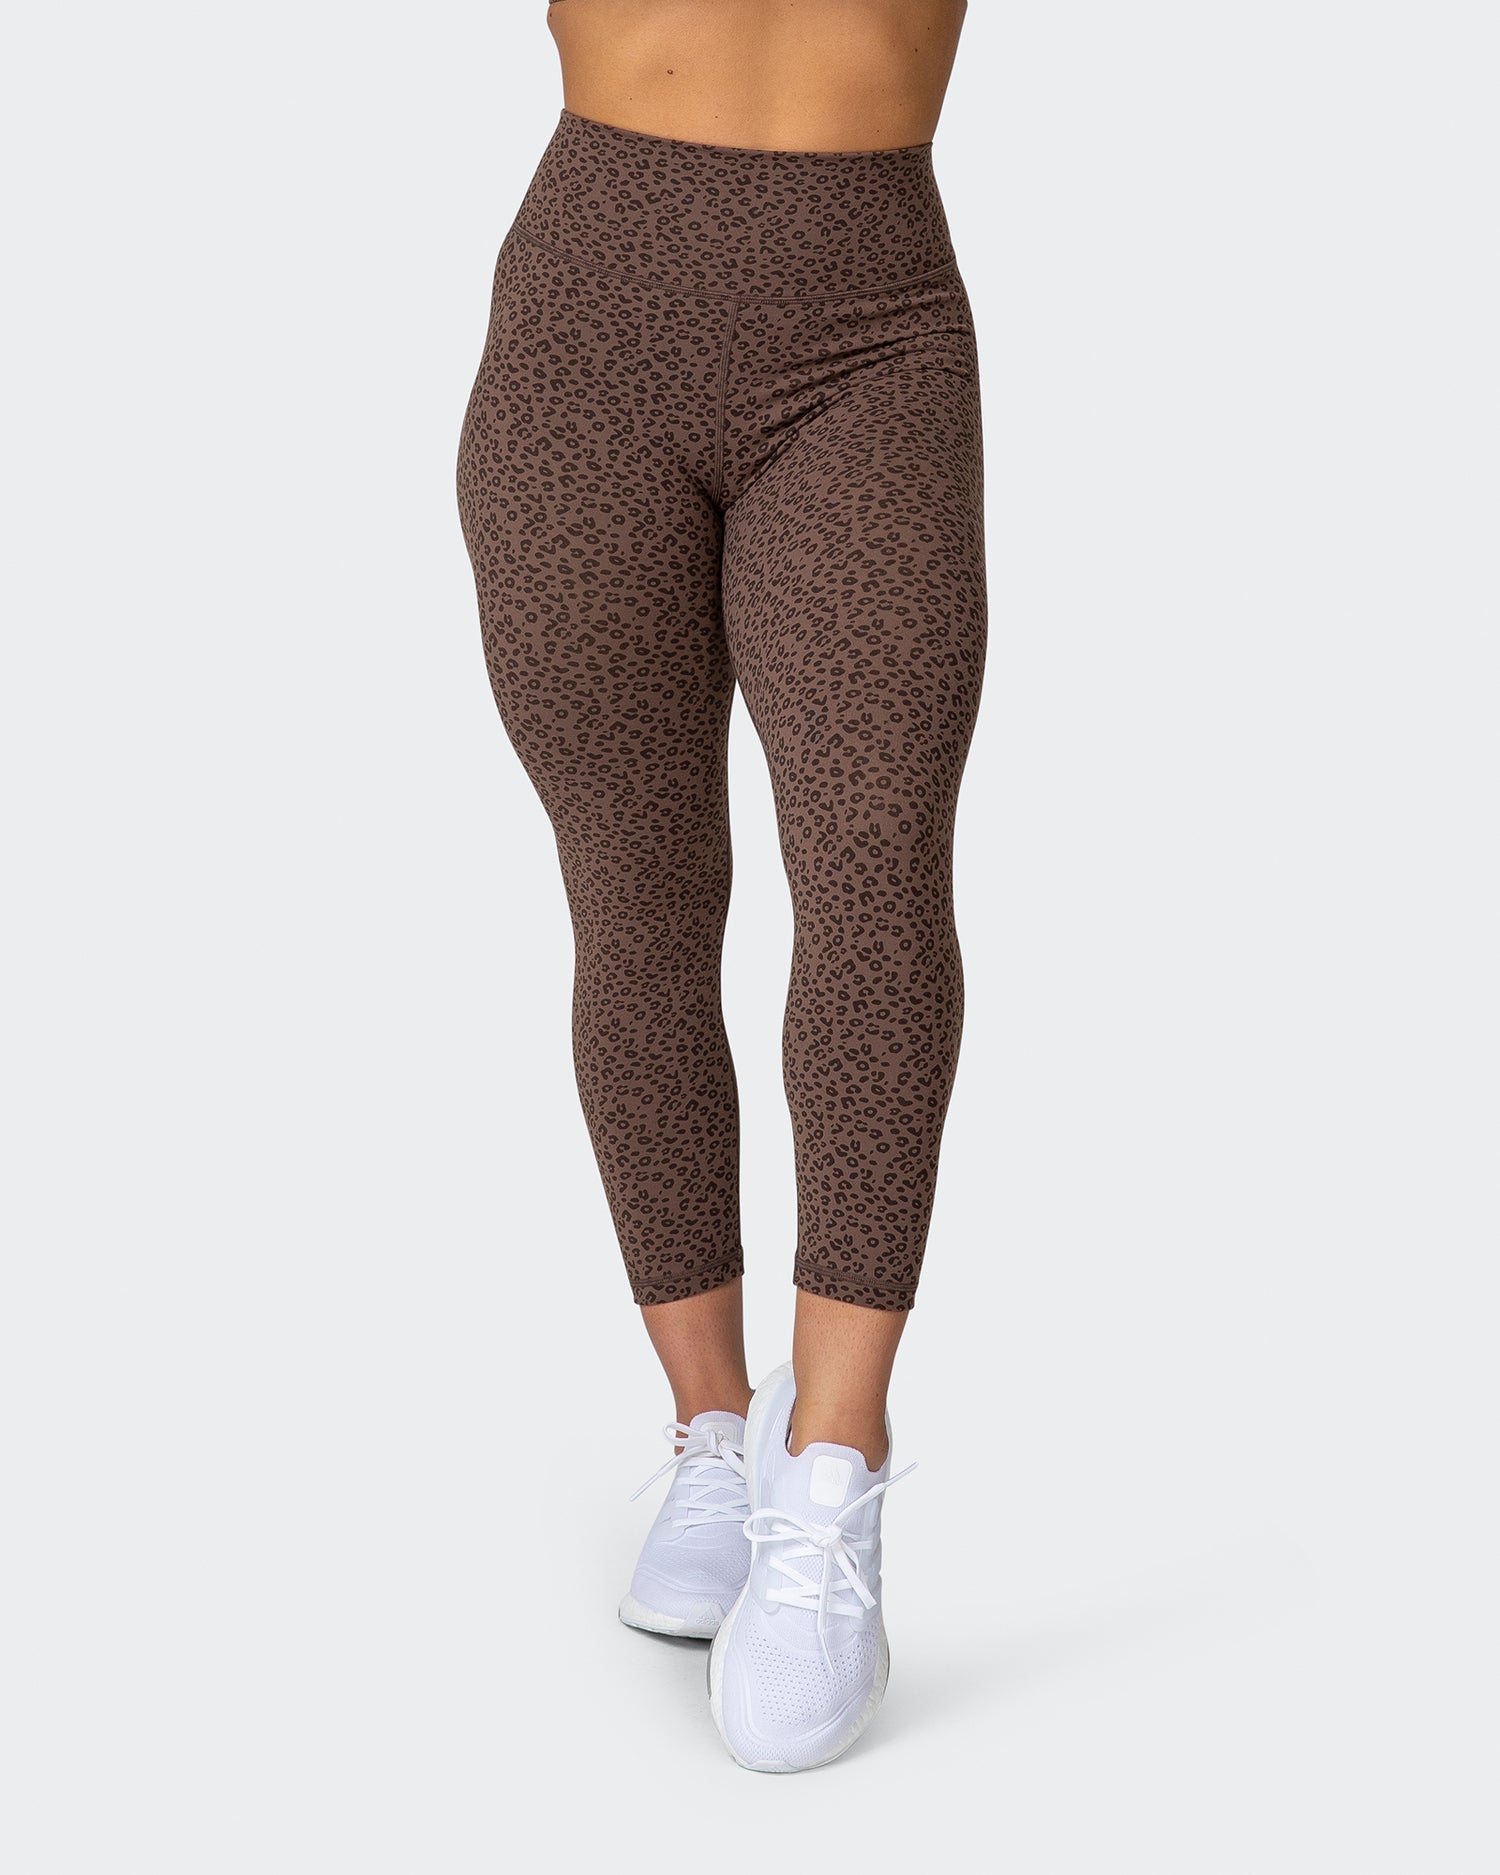 TNNZEET High Waisted Pattern Leggings for Women - Buttery Soft Tummy Control  Printed Pants for Workout Yoga, Cross Leopard/ Cheetah, Small-Medium price  in UAE,  UAE